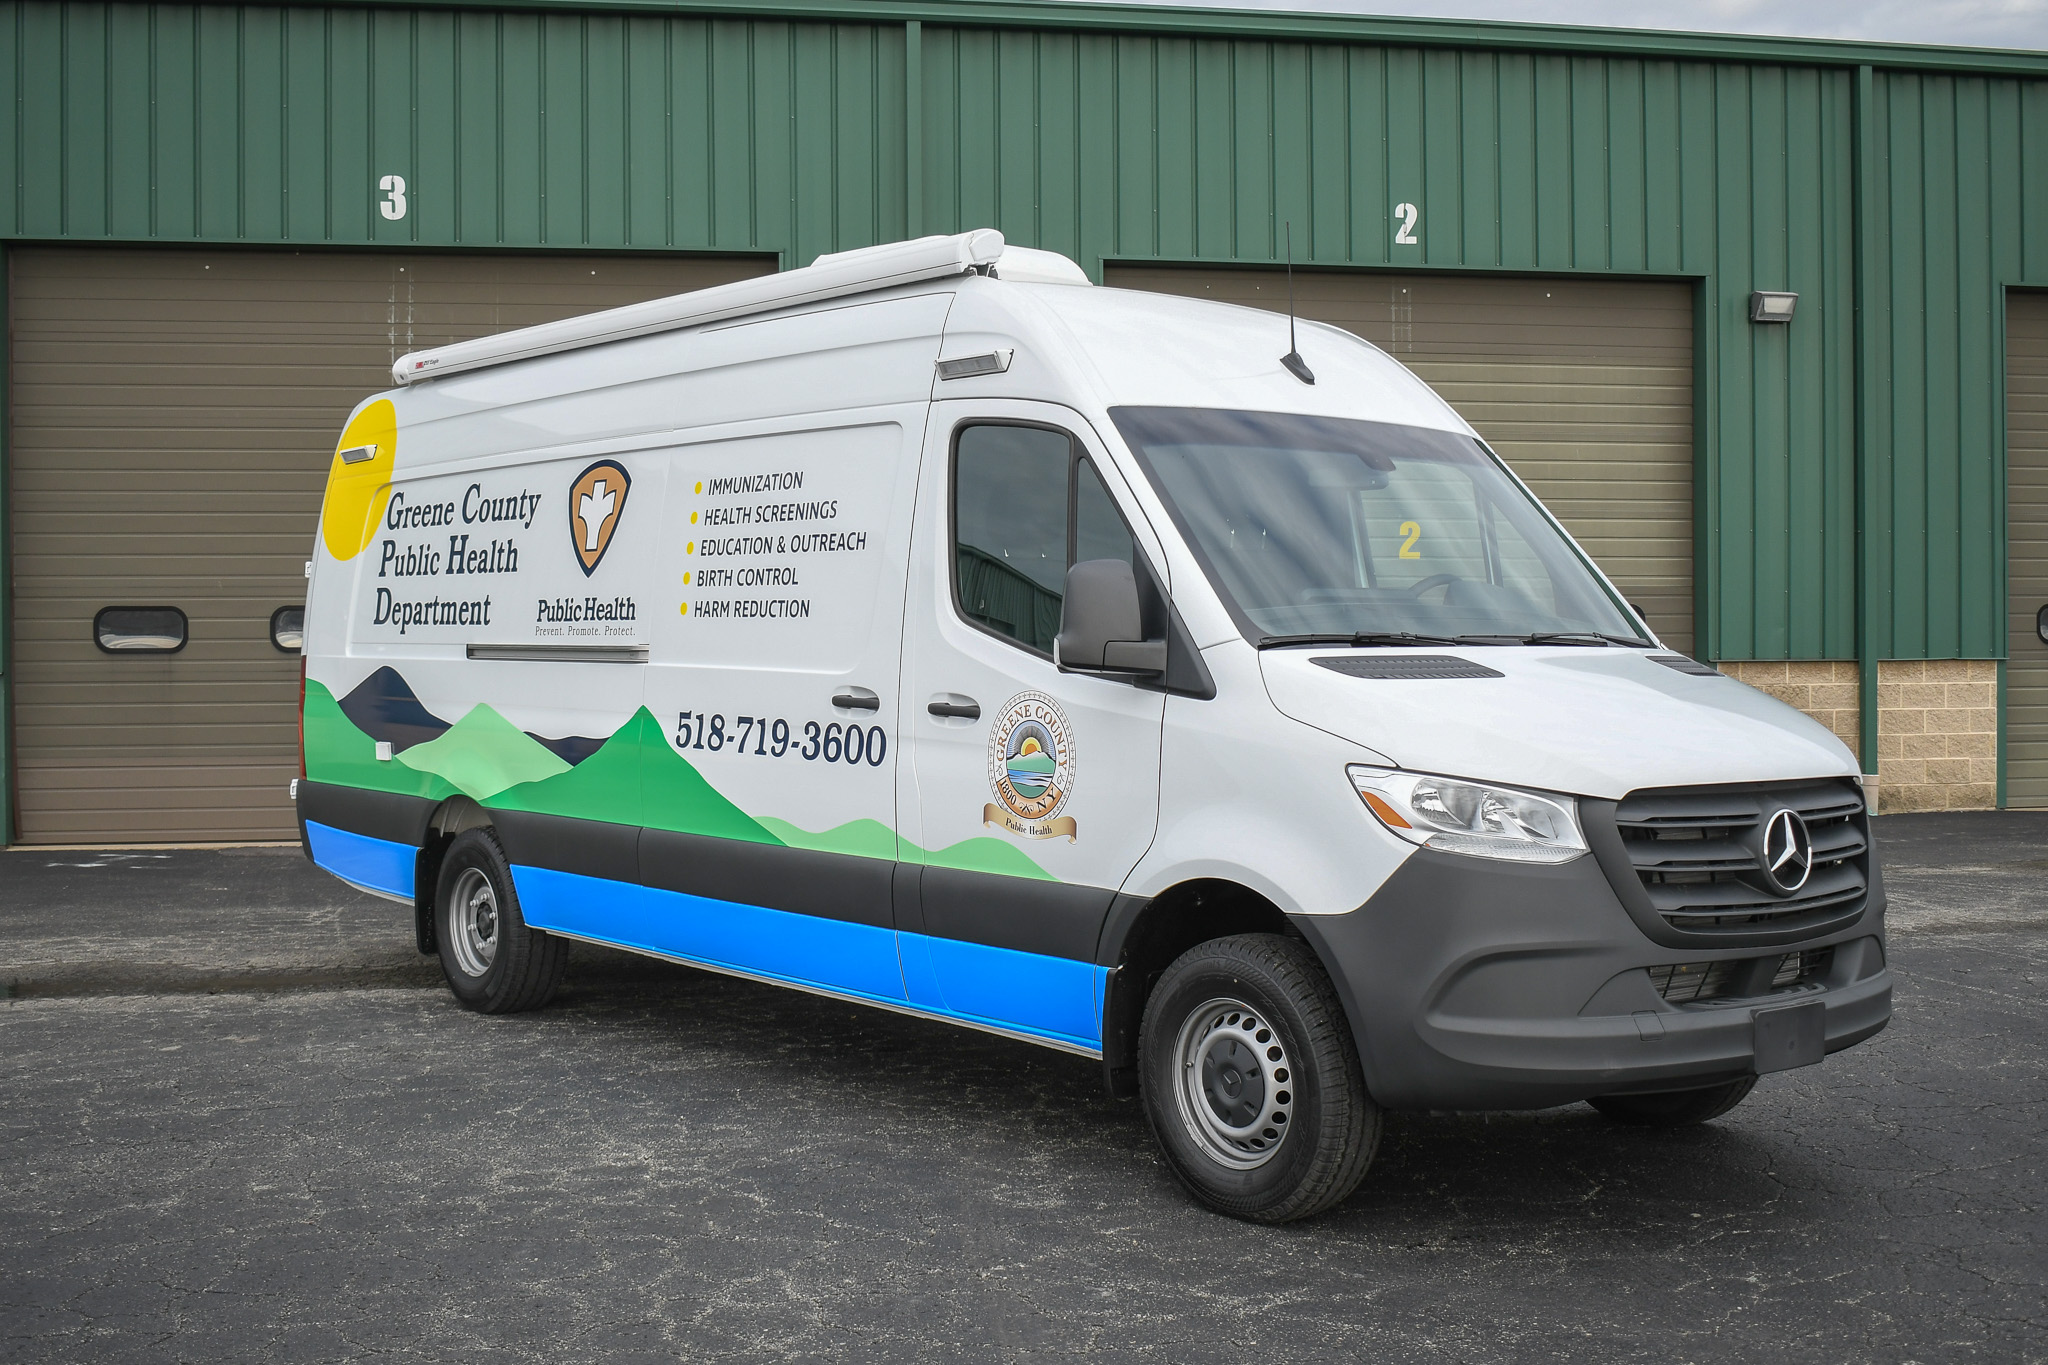 An exterior view of the unit for Greene County, NY.